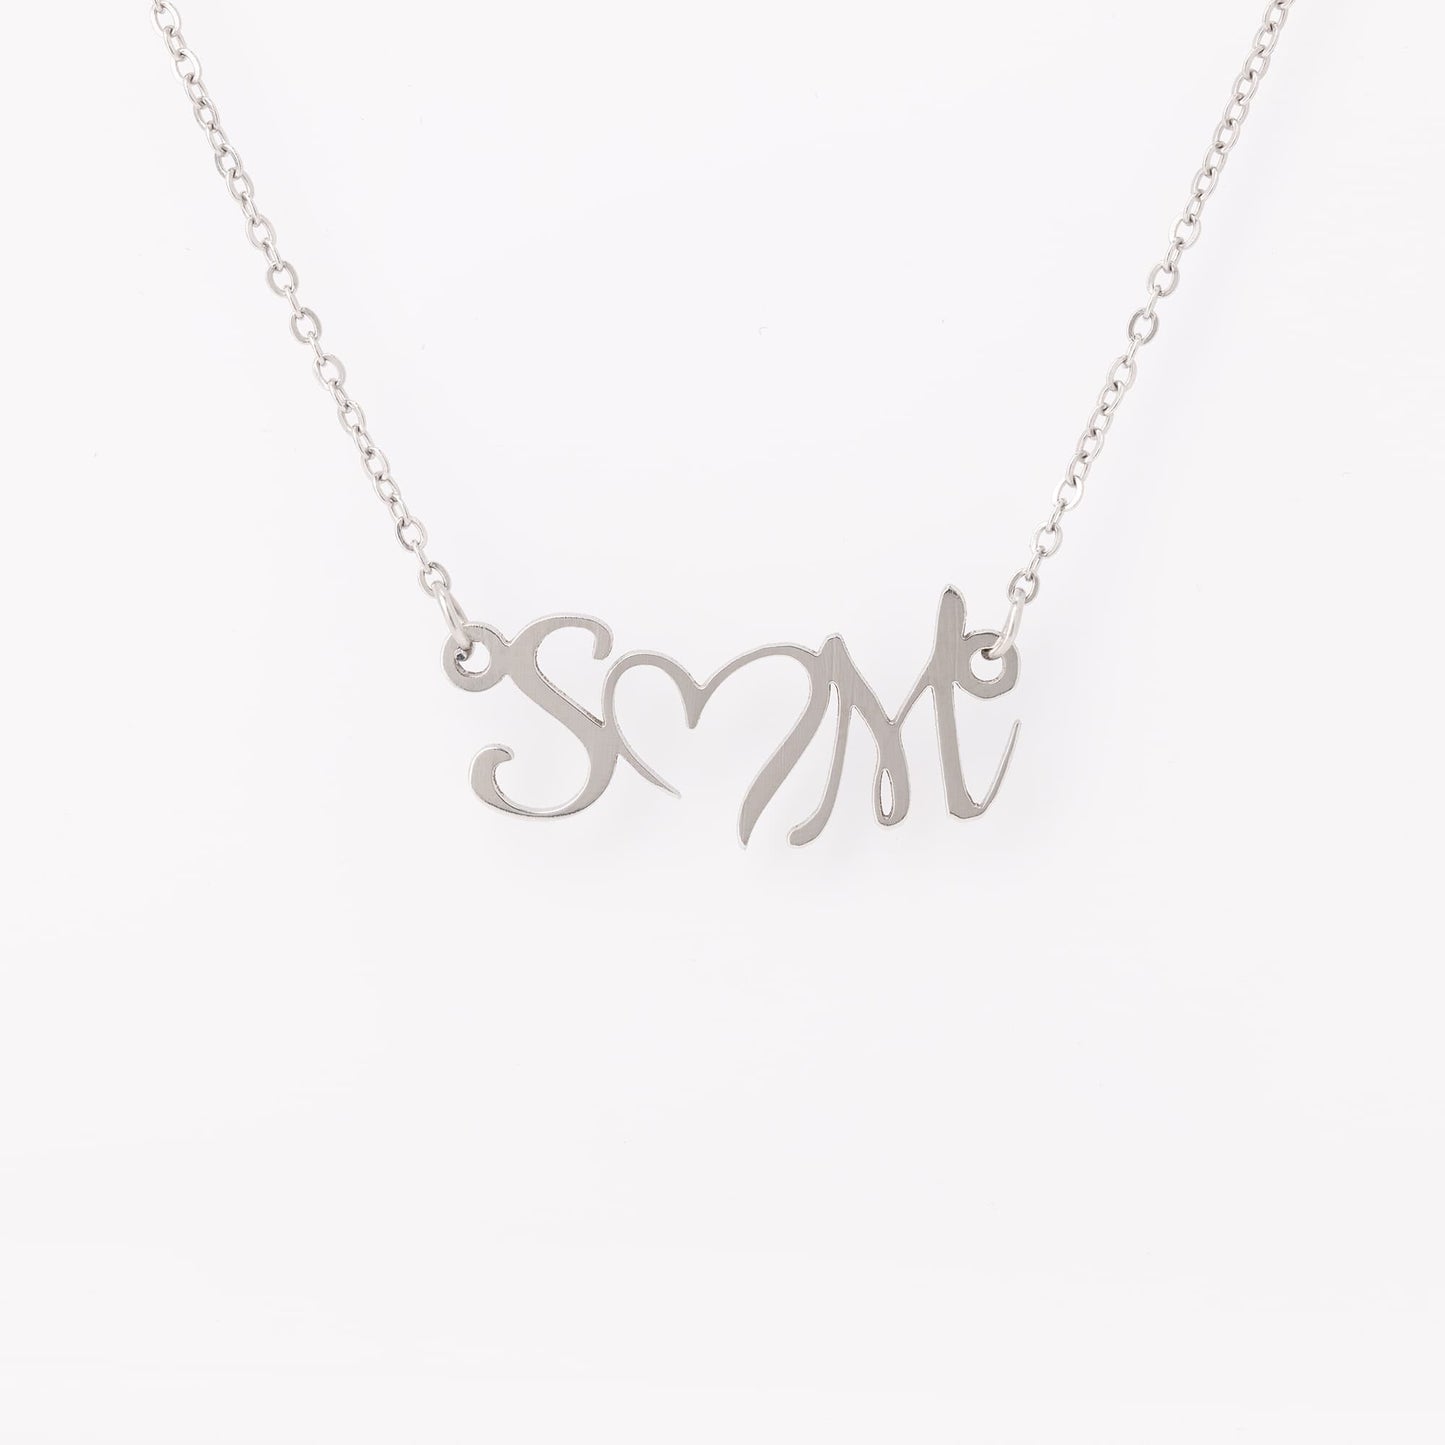 Love Necklace (Made in the usa)